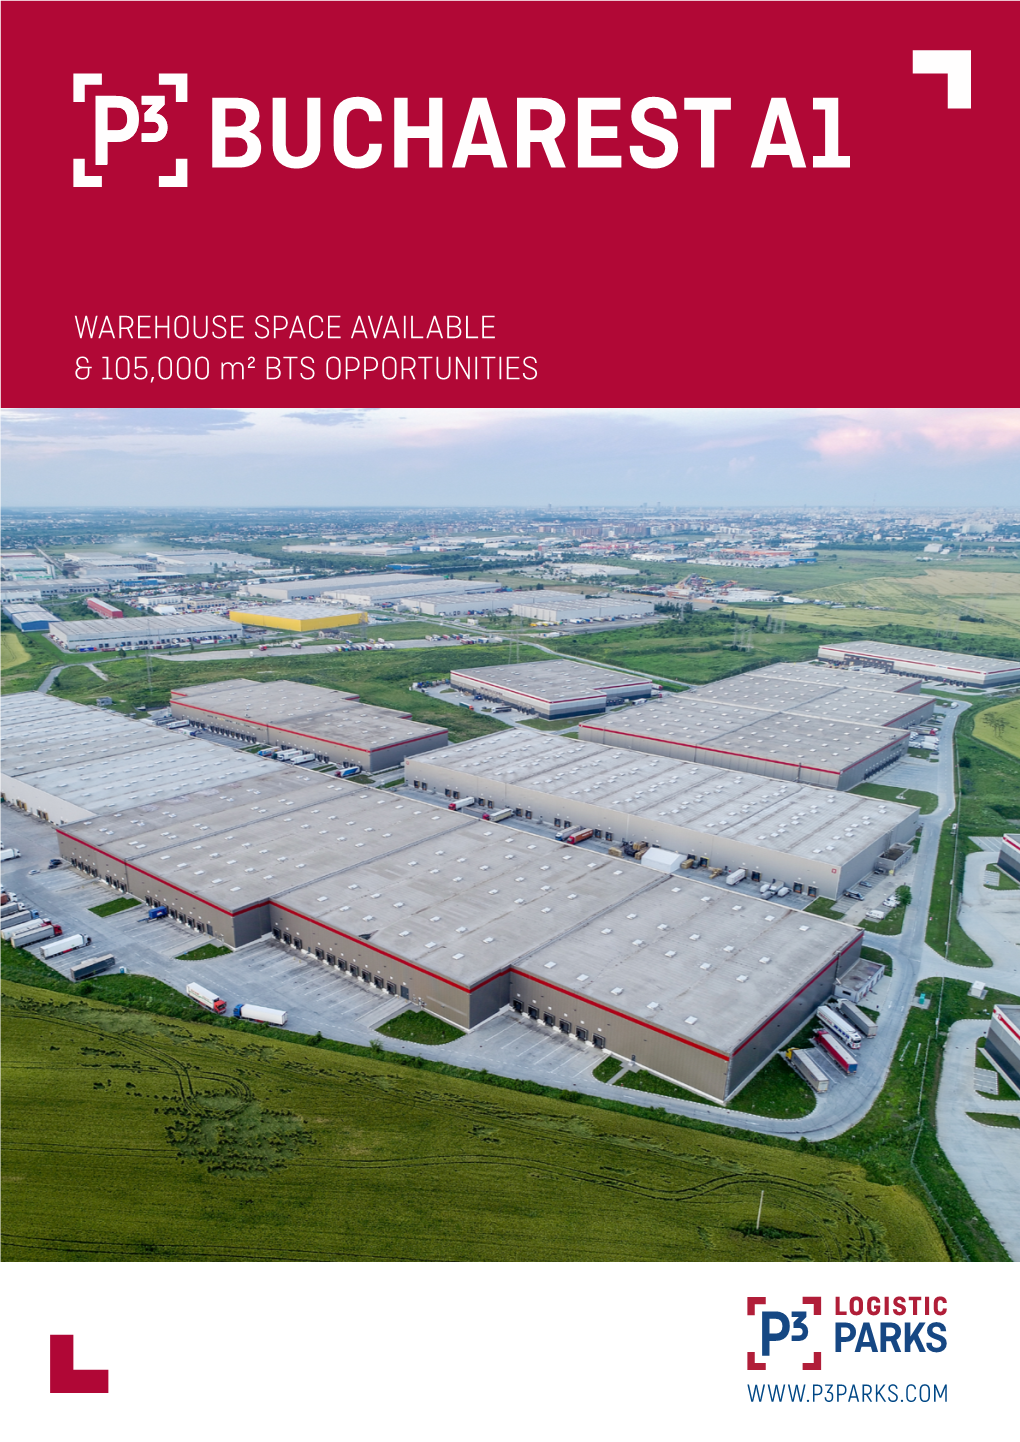 WAREHOUSE SPACE AVAILABLE & 105,000 M2 BTS OPPORTUNITIES